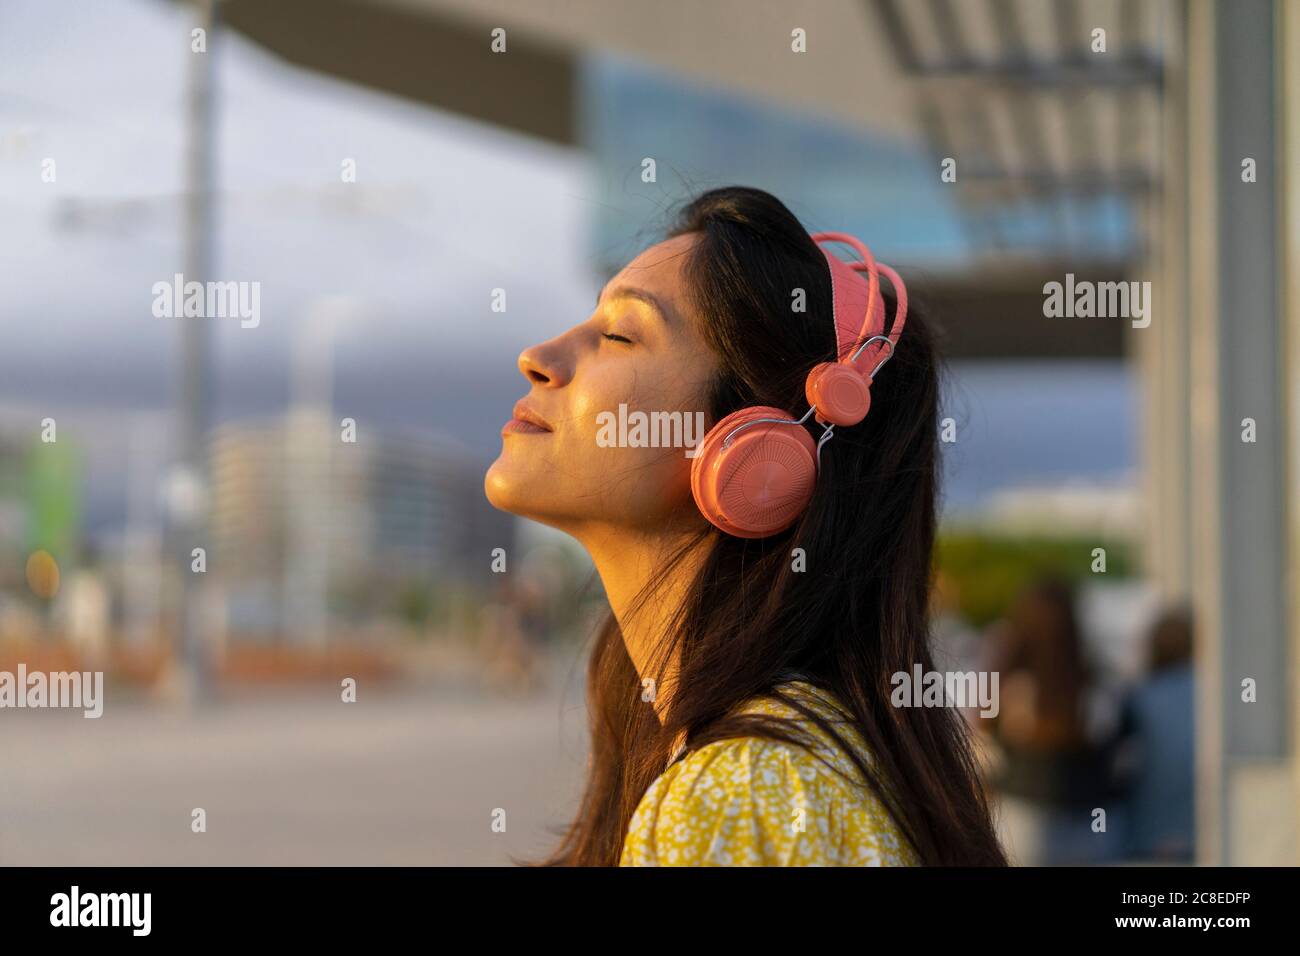 Relaxed young woman listening music in city Stock Photo